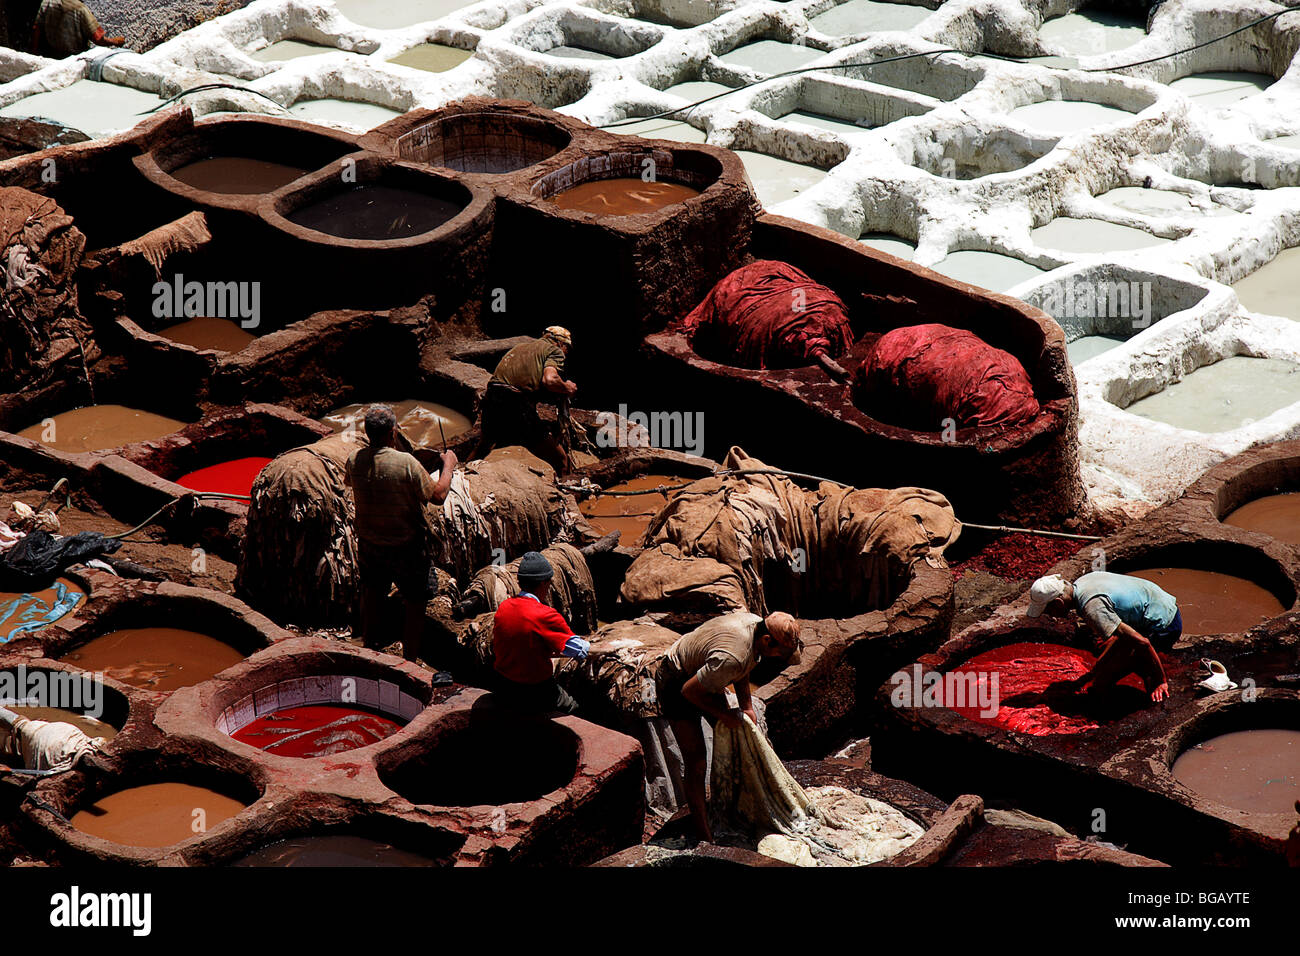 Leather tannery in Fes, Morocco 3 Stock Photo